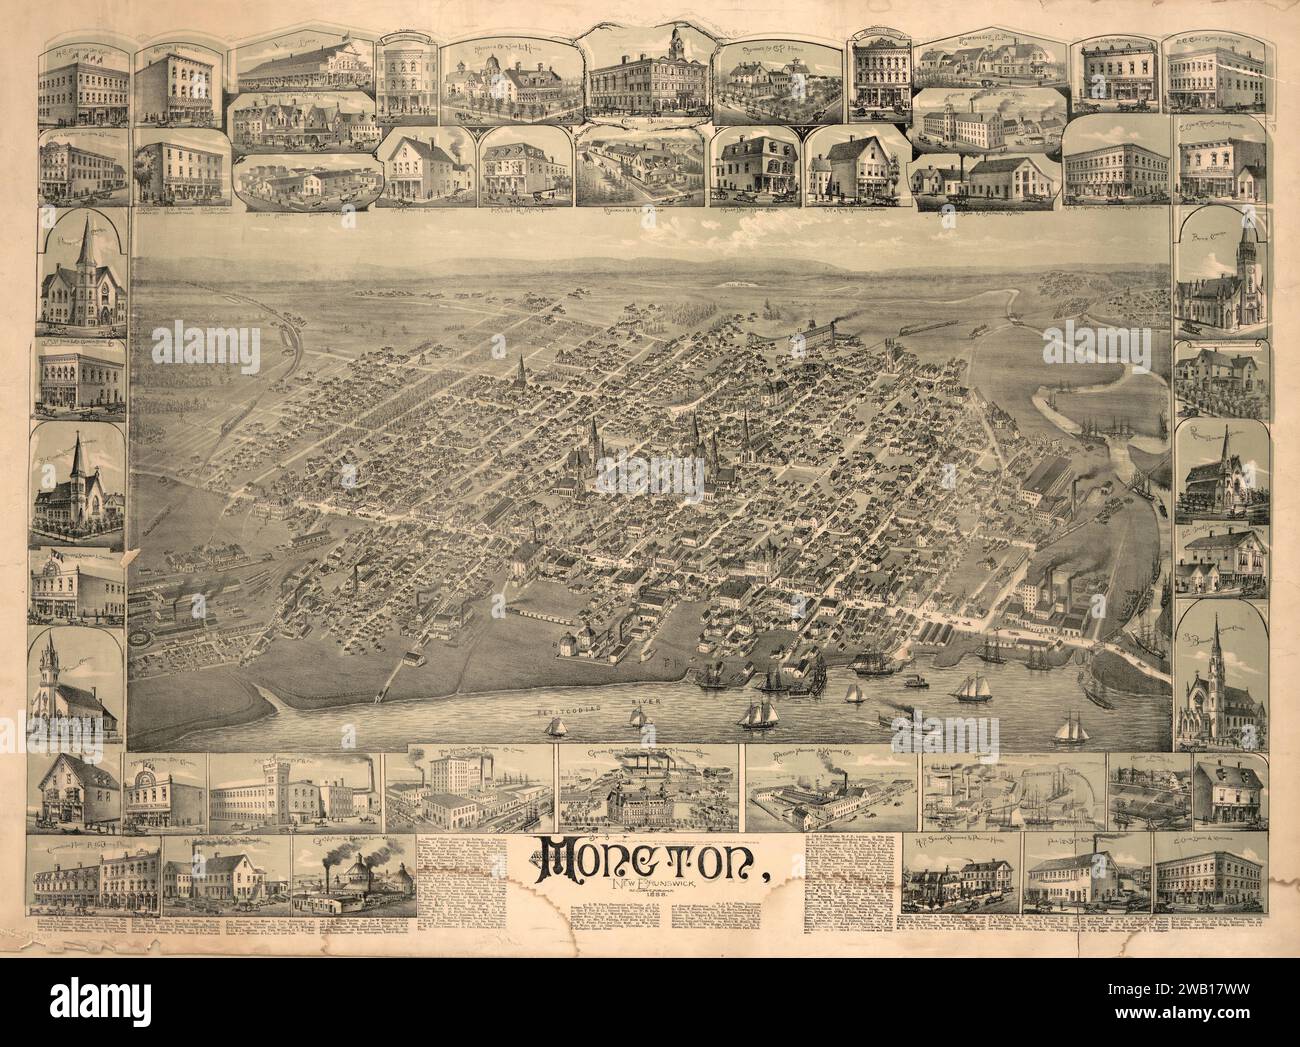 Vintage illustrated map of the city of Moncton, New Brunswick, Canada 1888. Insets shows prominent buildings, businesses and residences. Stock Photo